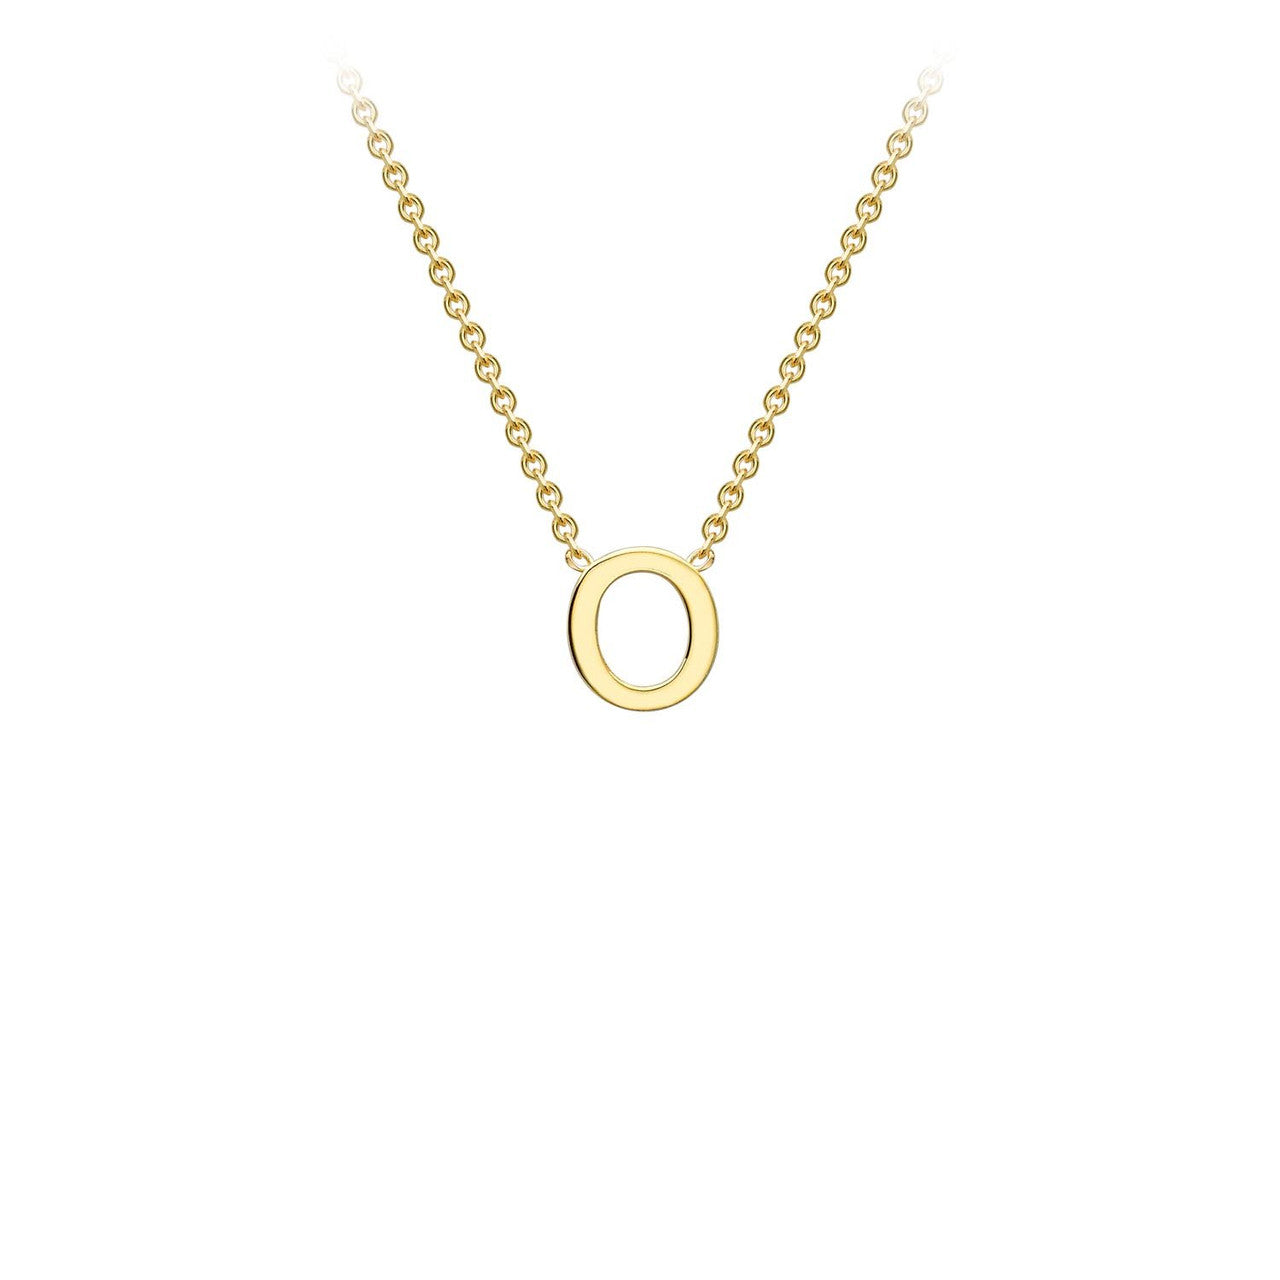 Ice Jewellery 9K Yellow Gold 'O' Initial Adjustable Letter Necklace 38/43cm - 1.19.0164 | Ice Jewellery Australia